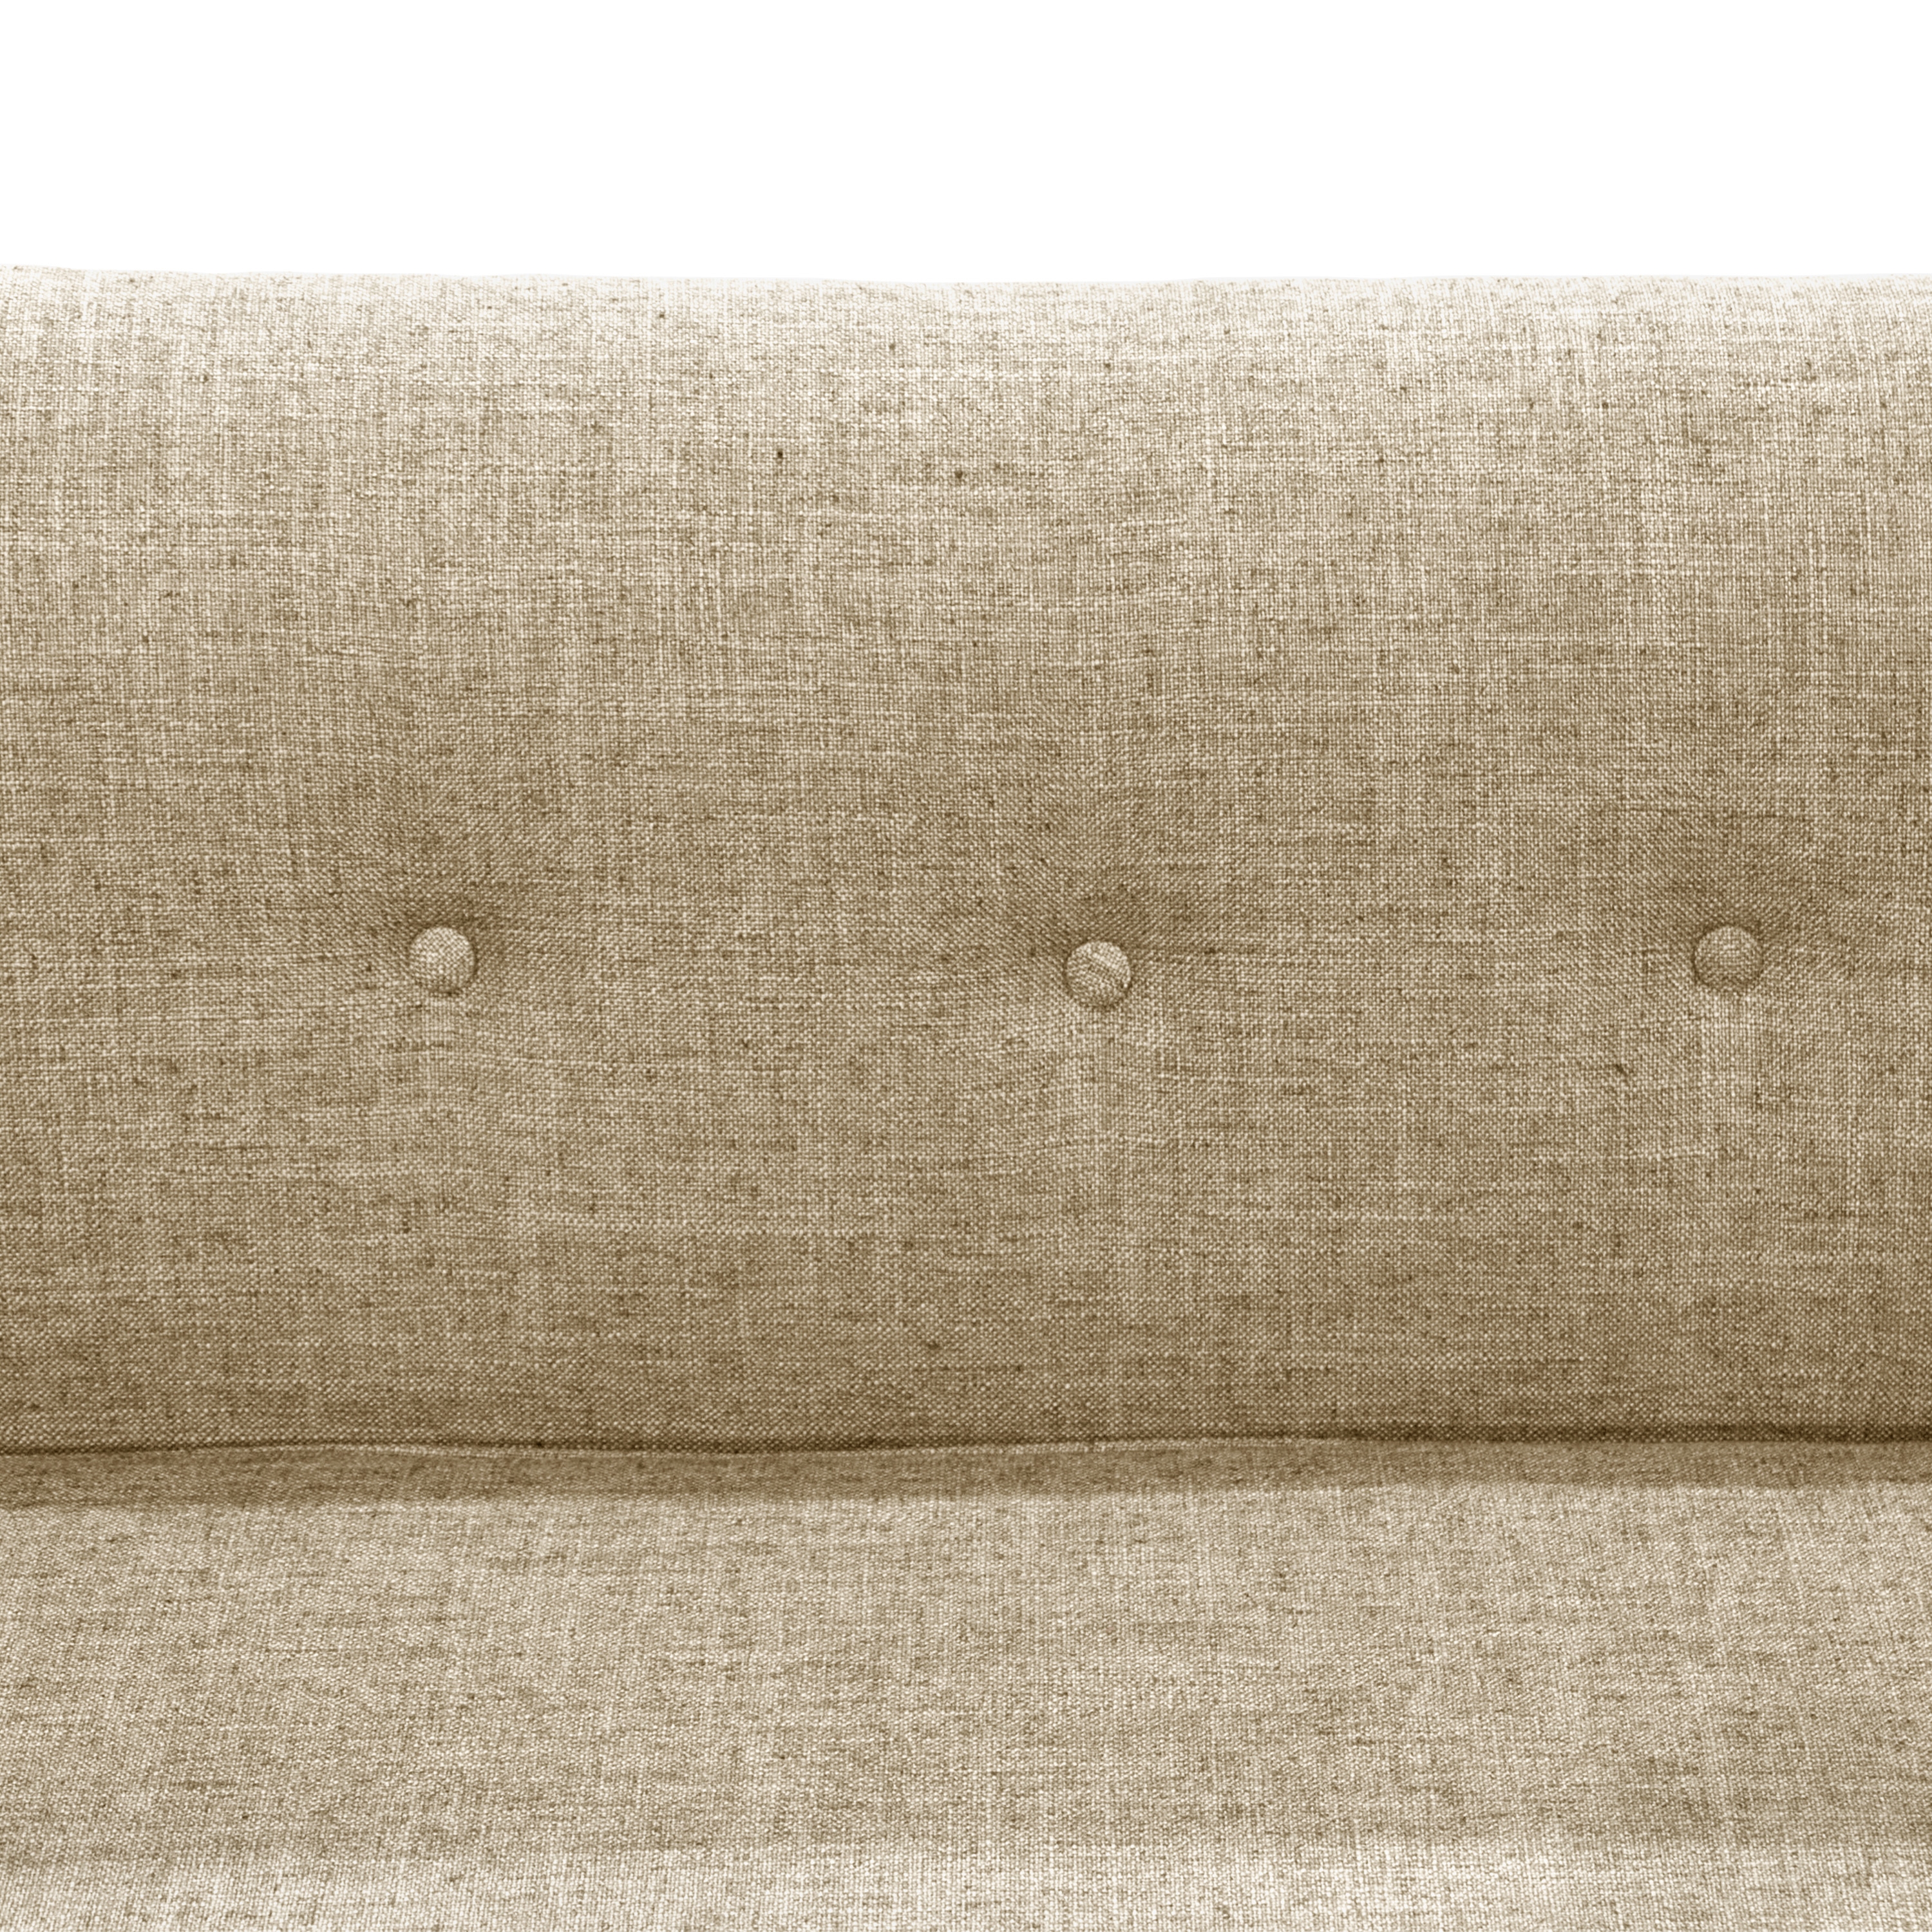 Downing Settee, Linen - DNU - Image 4